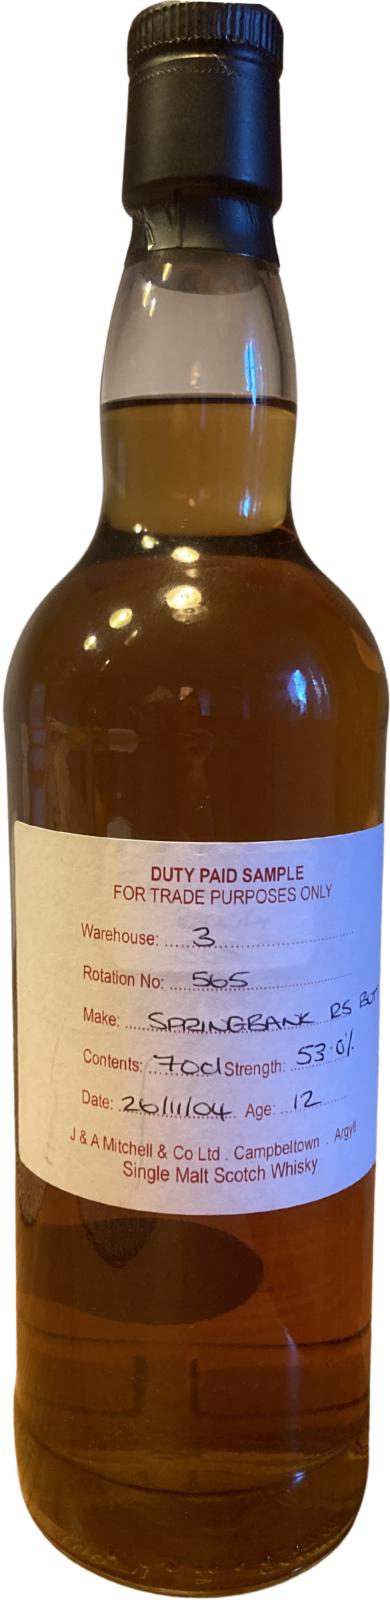 Springbank 2004 Duty Paid Sample For Trade Purposes Only Refill Sherry Butt 53% 700ml